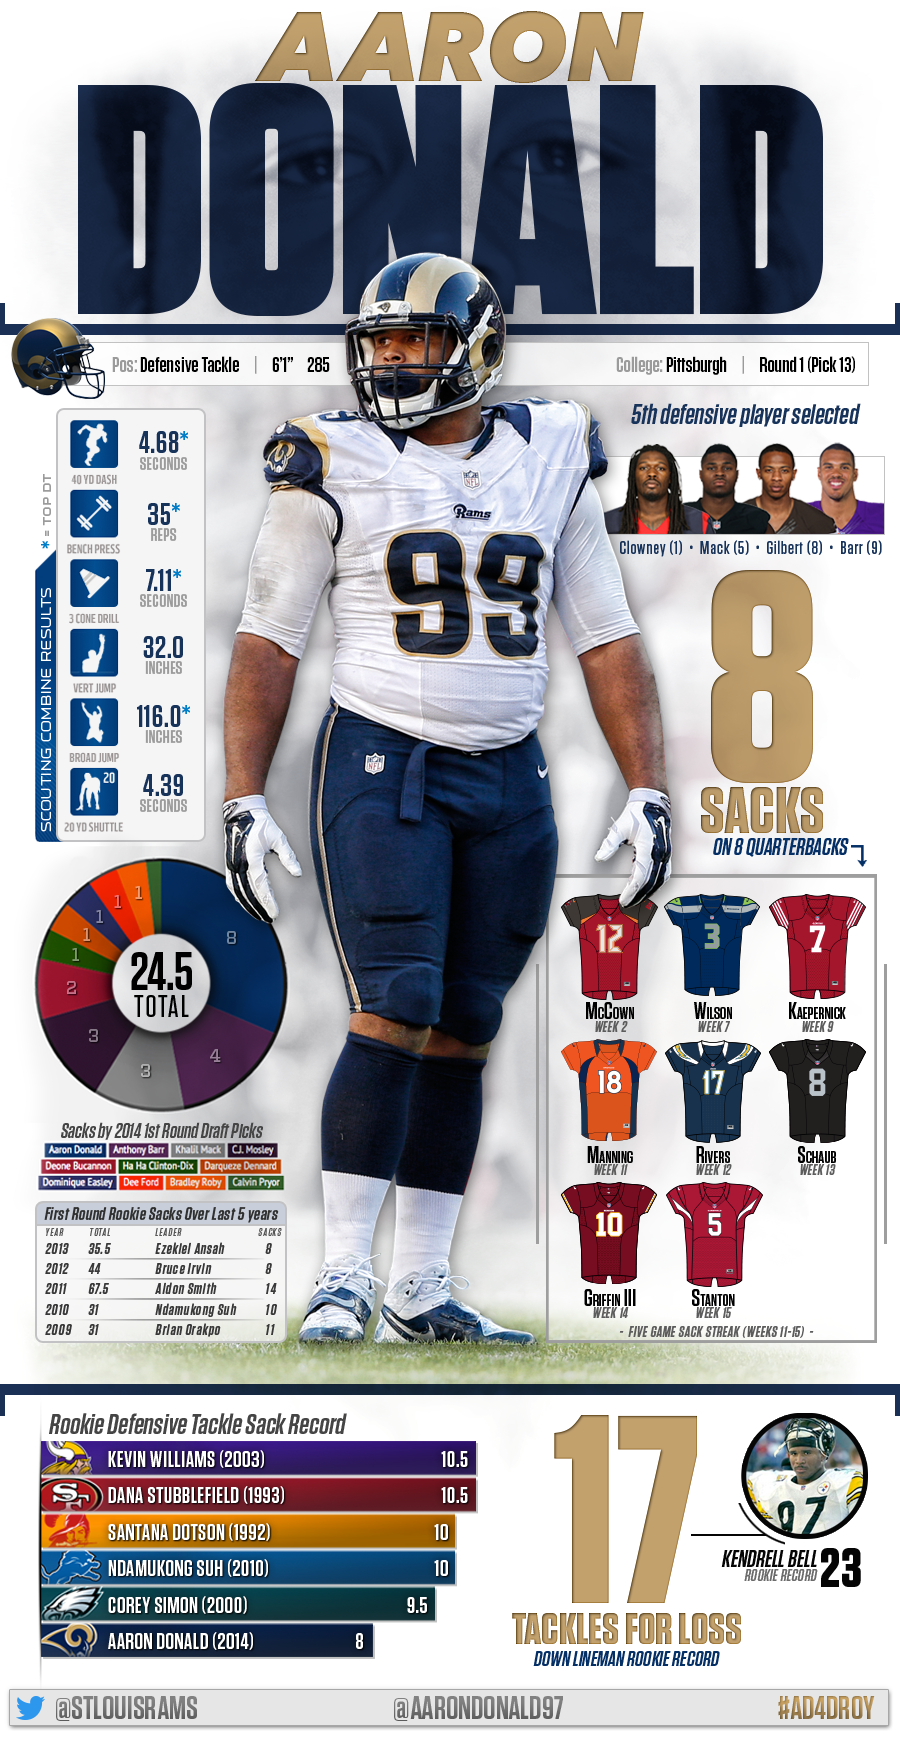 Aaron Donald for Defensive Rookie of the Year Push on Behance